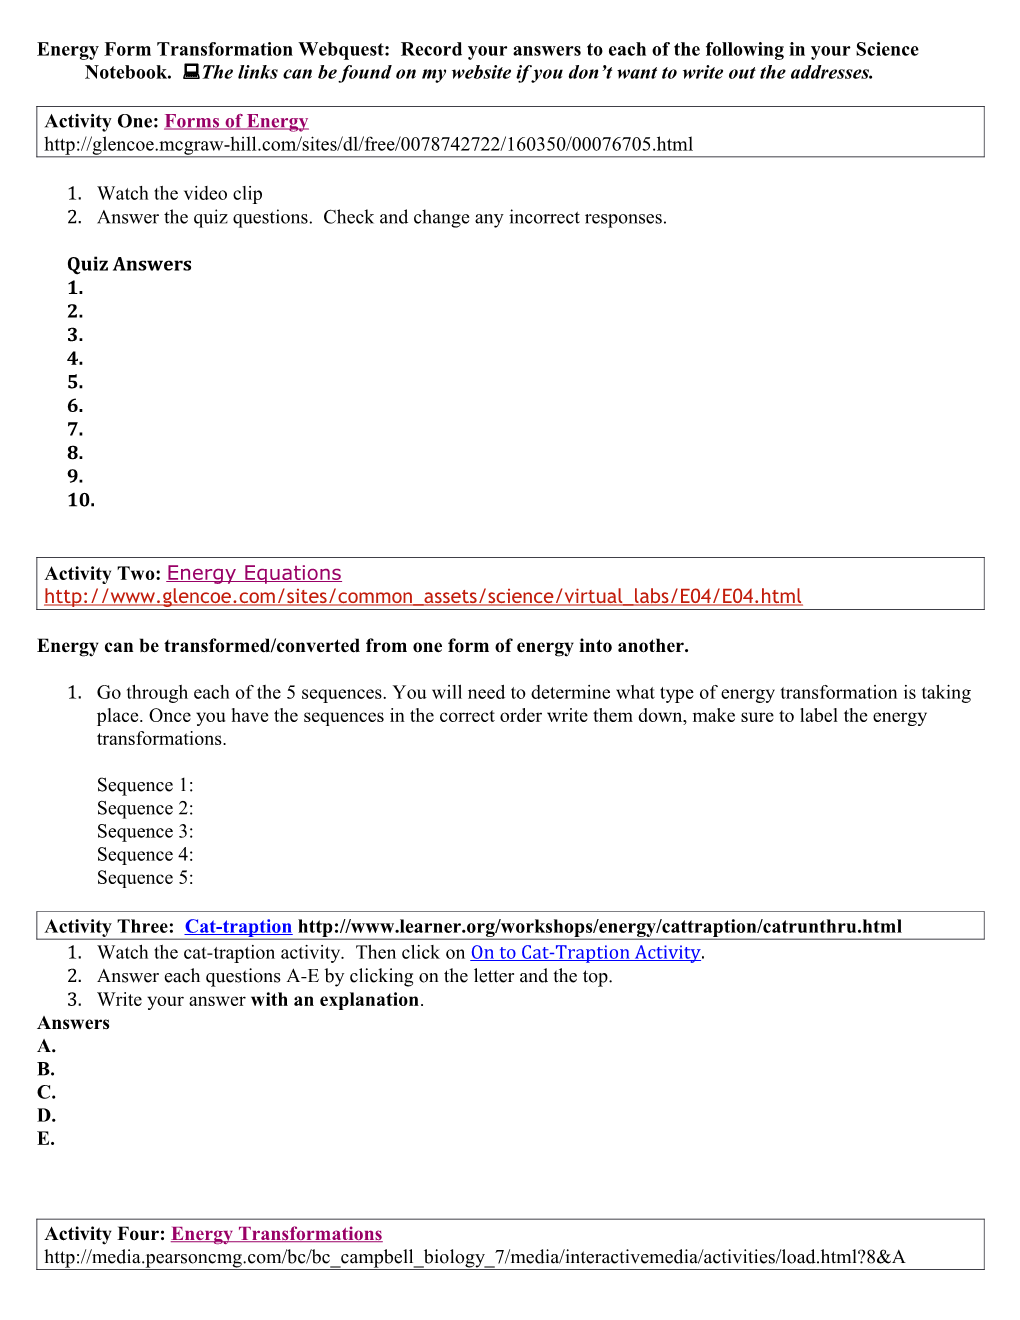 Energy Form Transformation Webquest: Record Your Answers to Each of the Following in Your